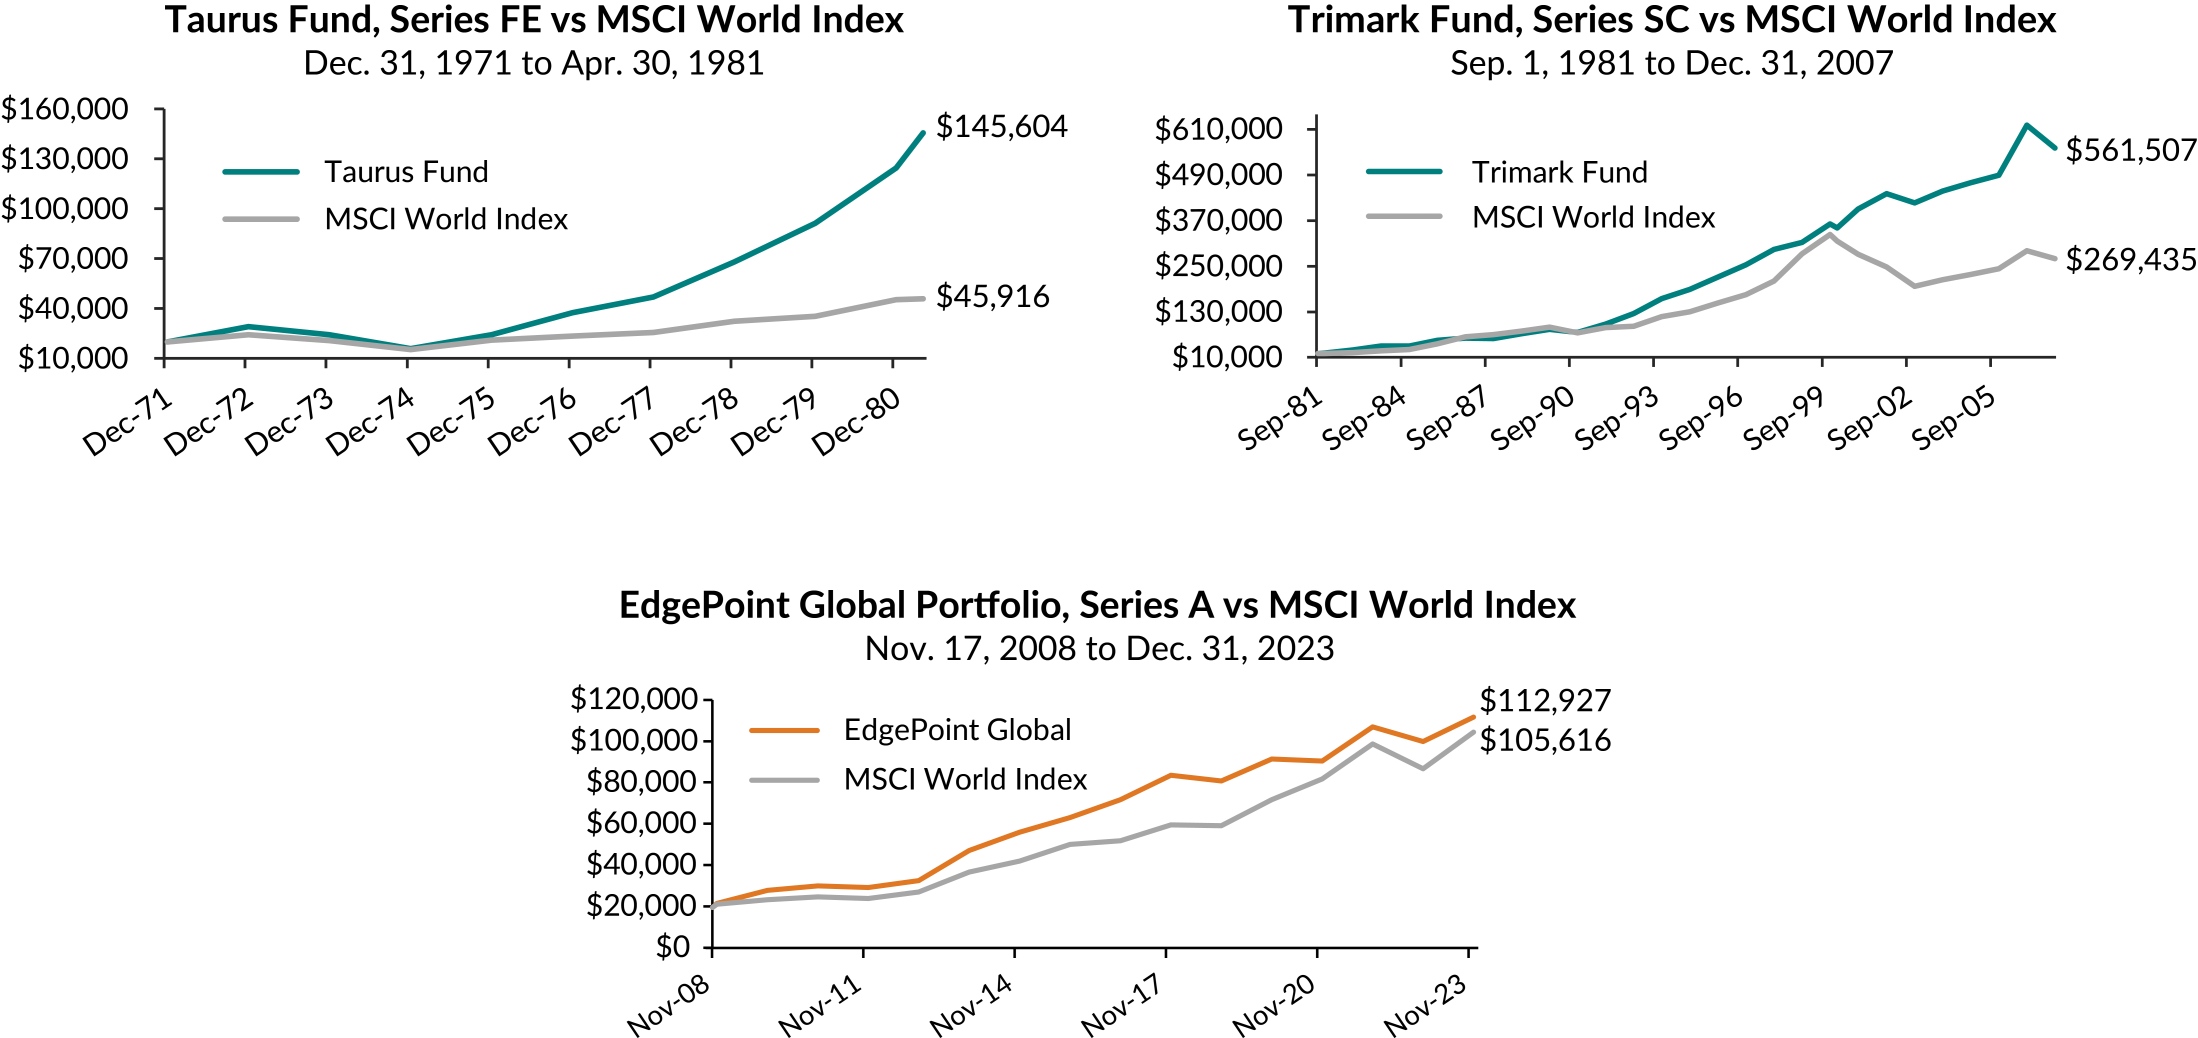 Three charts showing the over three periods and five decades of the investment approach applied at EdgePoint. It focuses on the growth of $20,000 for each period.

December 31, 1971 to April 30, 1981
Taurus Fund end value: $145,604
MSCI World Index end value: $45,916

September 1, 1981 to December 31, 2007
Trimark Fund end value: $561,507
MSCI World Index end value: $269,435

November 17, 2008 to December 31, 2023
EdgePoint Global Portfolio, Series A end value: $112,927
MSCI World Index end value: $105,616